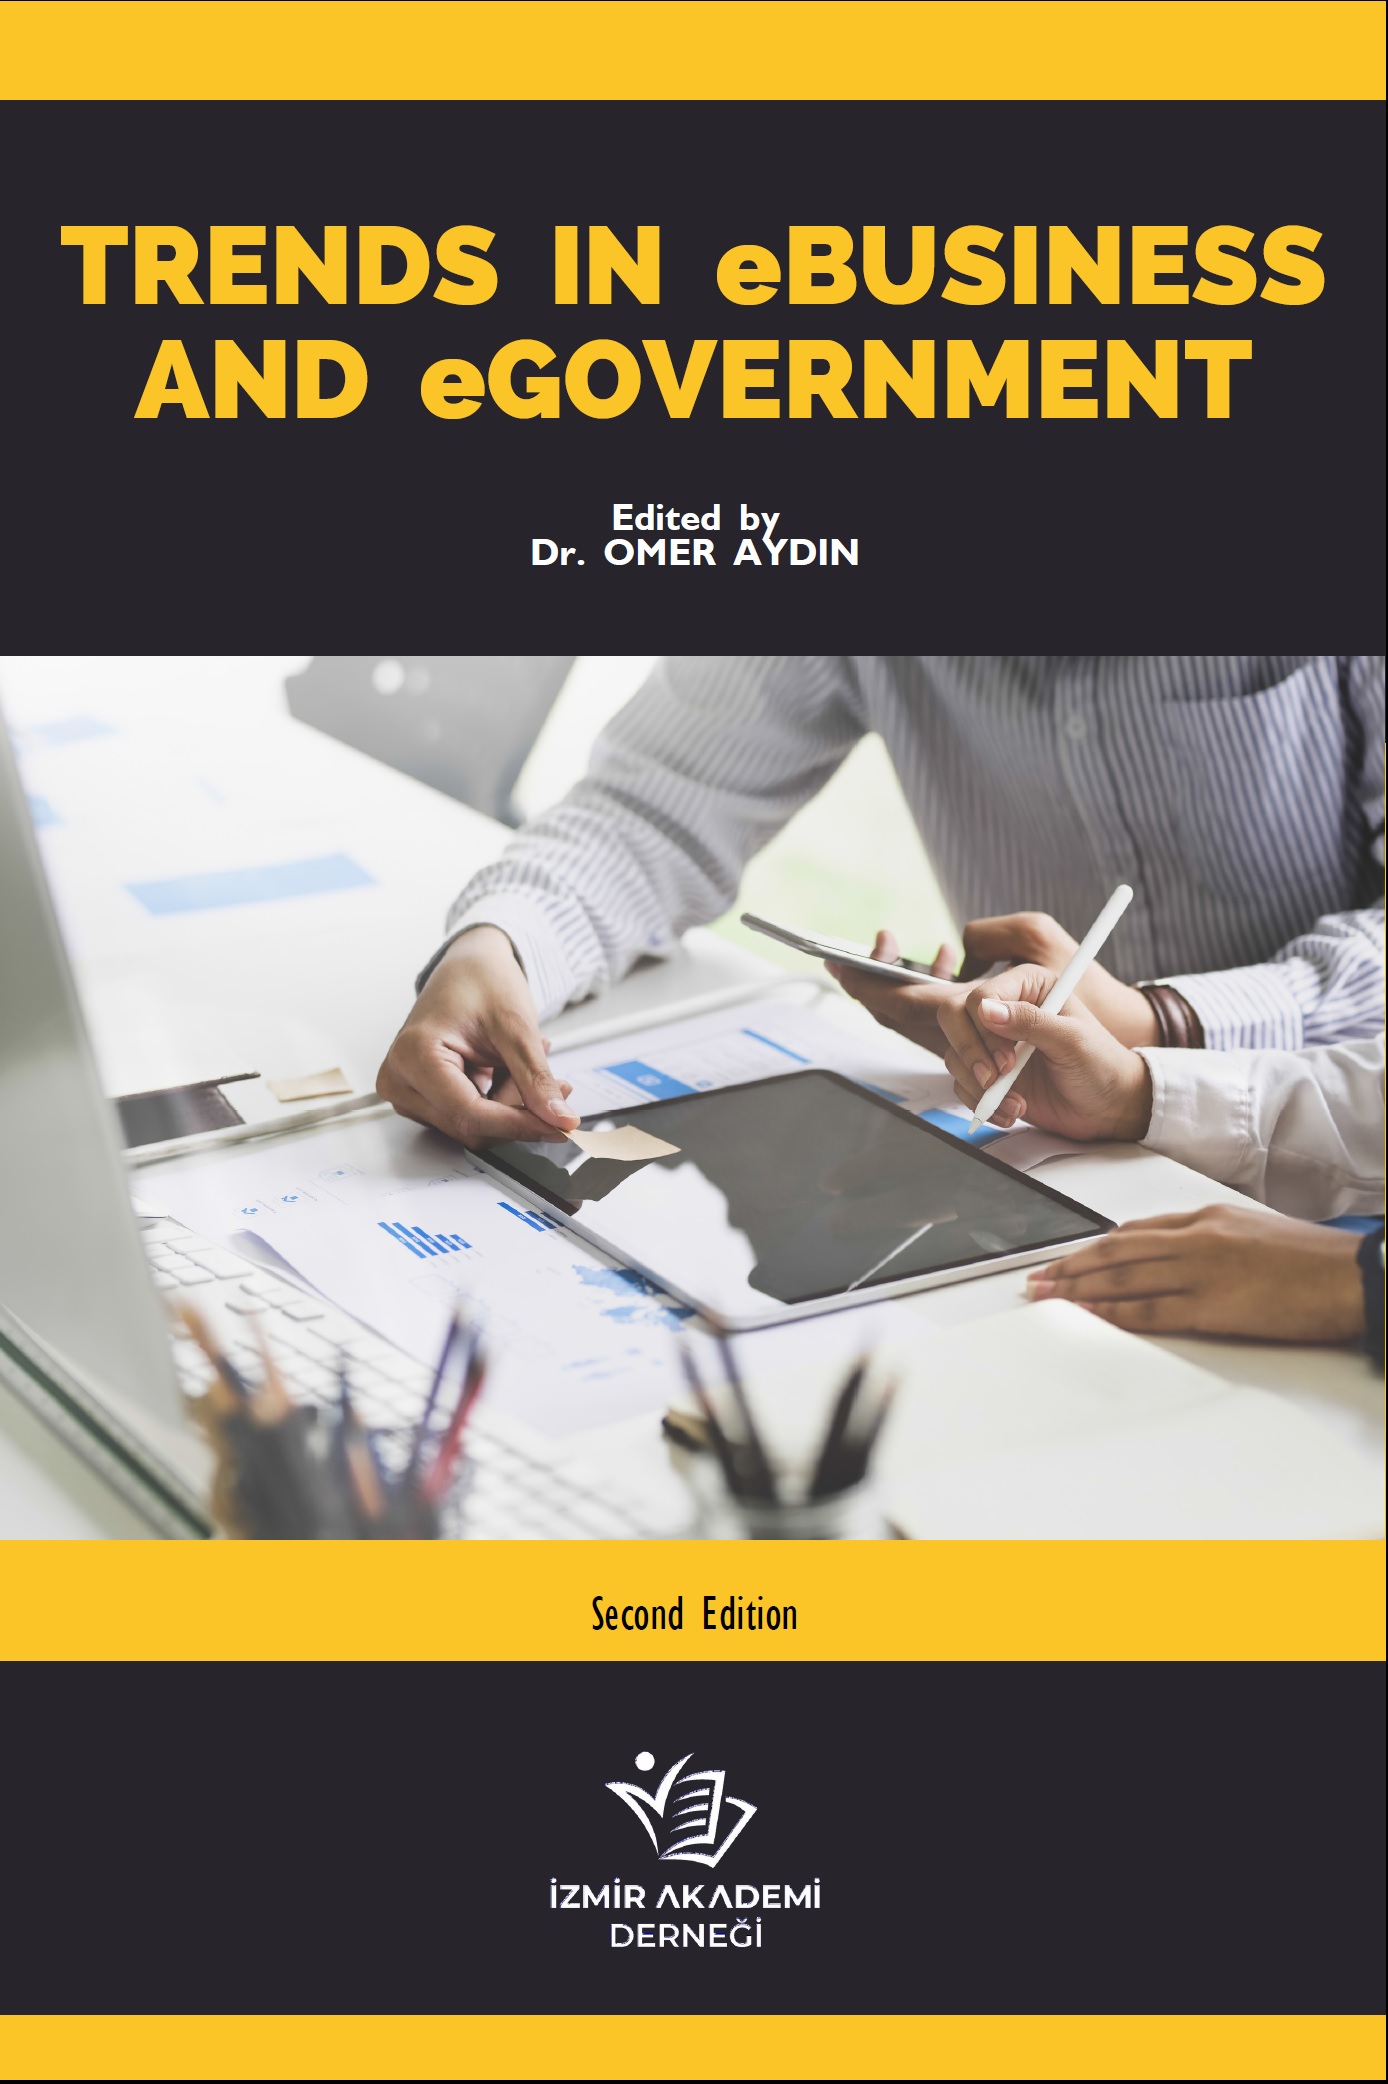 Trends in eBusiness and eGovernment